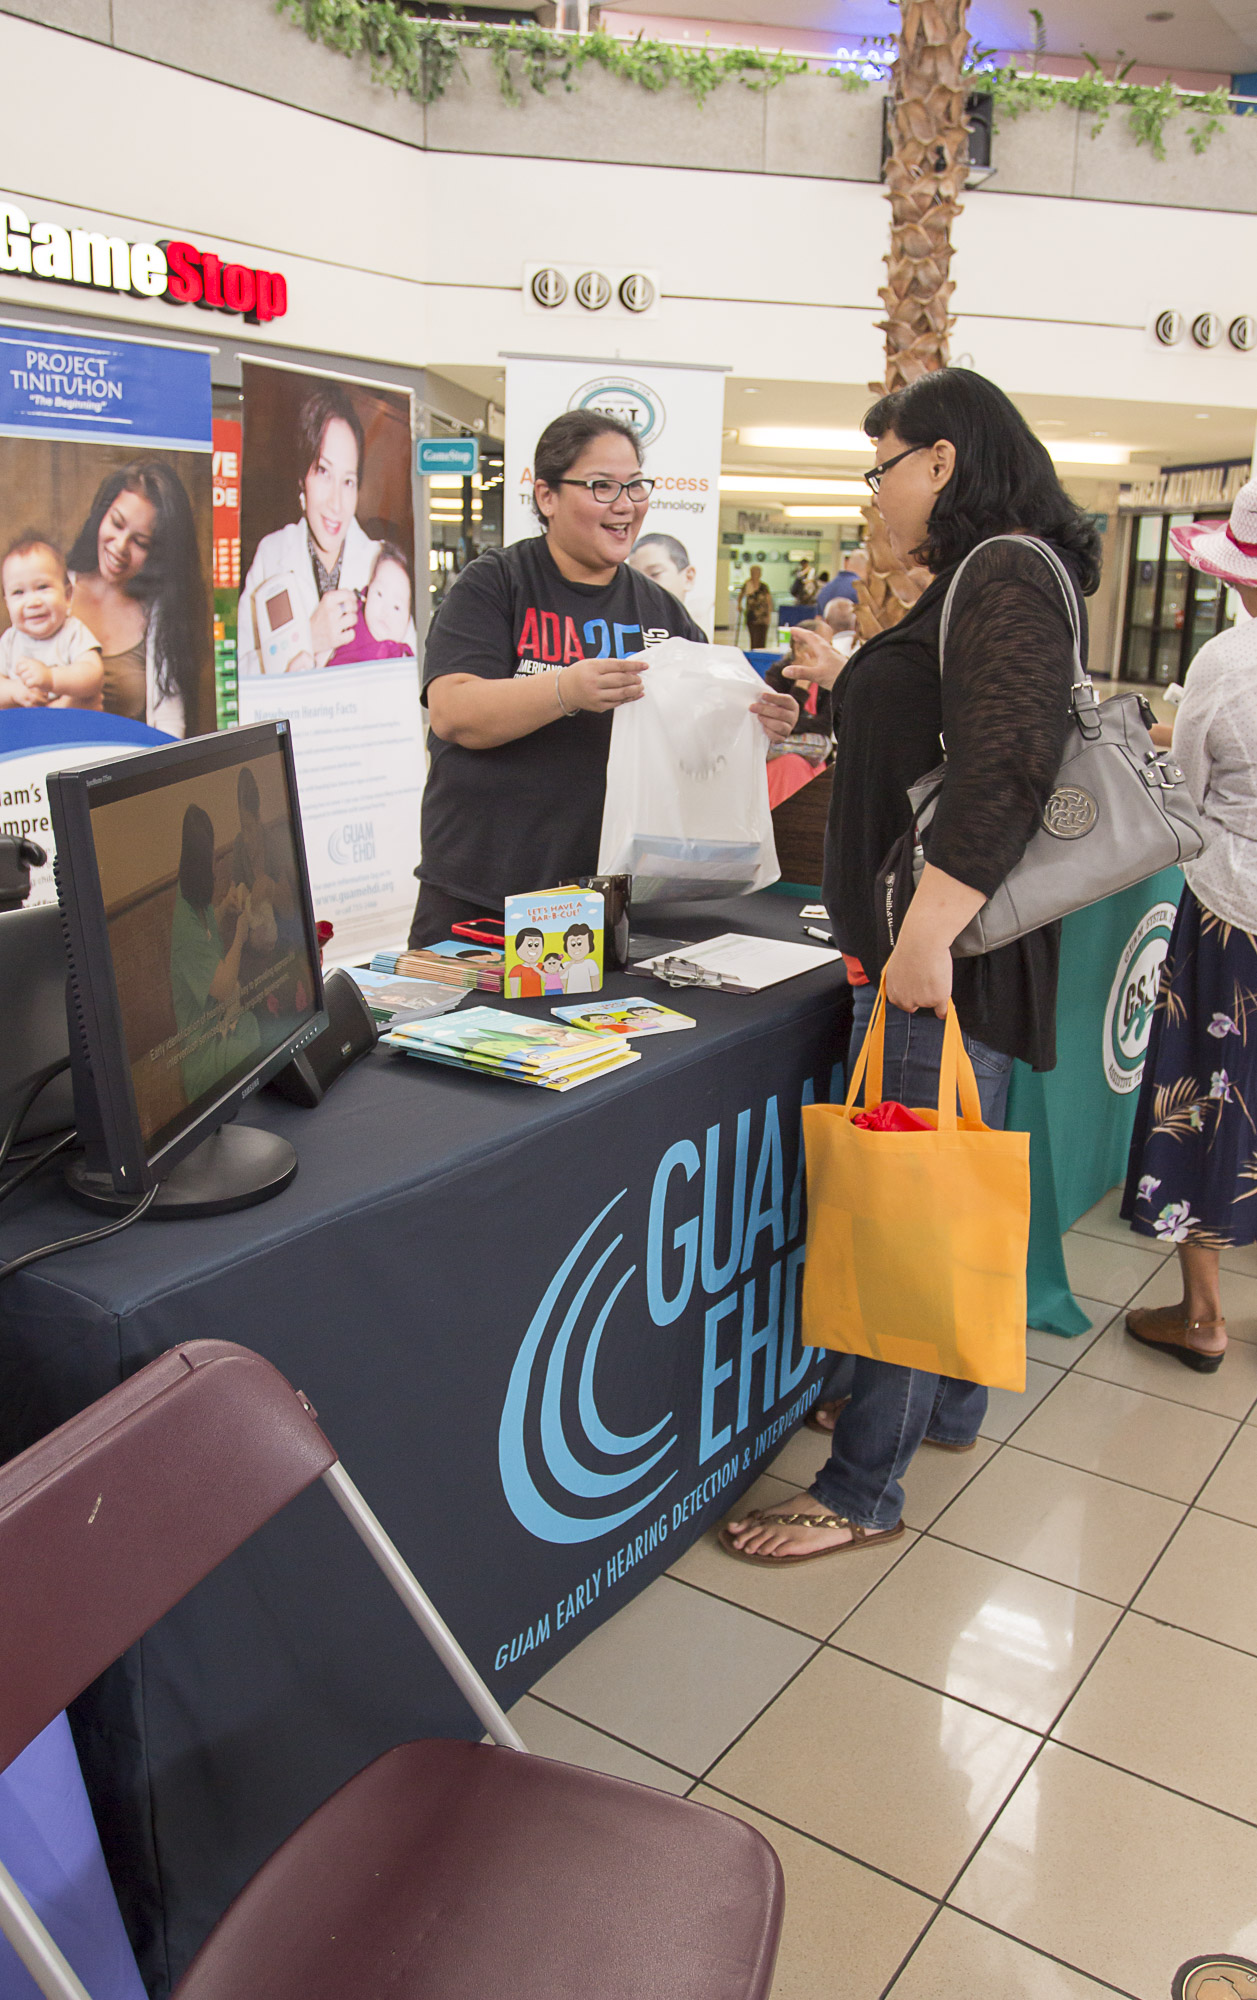 Vera Blaz, Guam CEDDERS Training Associate (left), distributed information on Project Tinituhon and Guam EHDI to a visitors during the Better Speech and Hearing Fair at the Micronesia Mall Center Court on May 7.